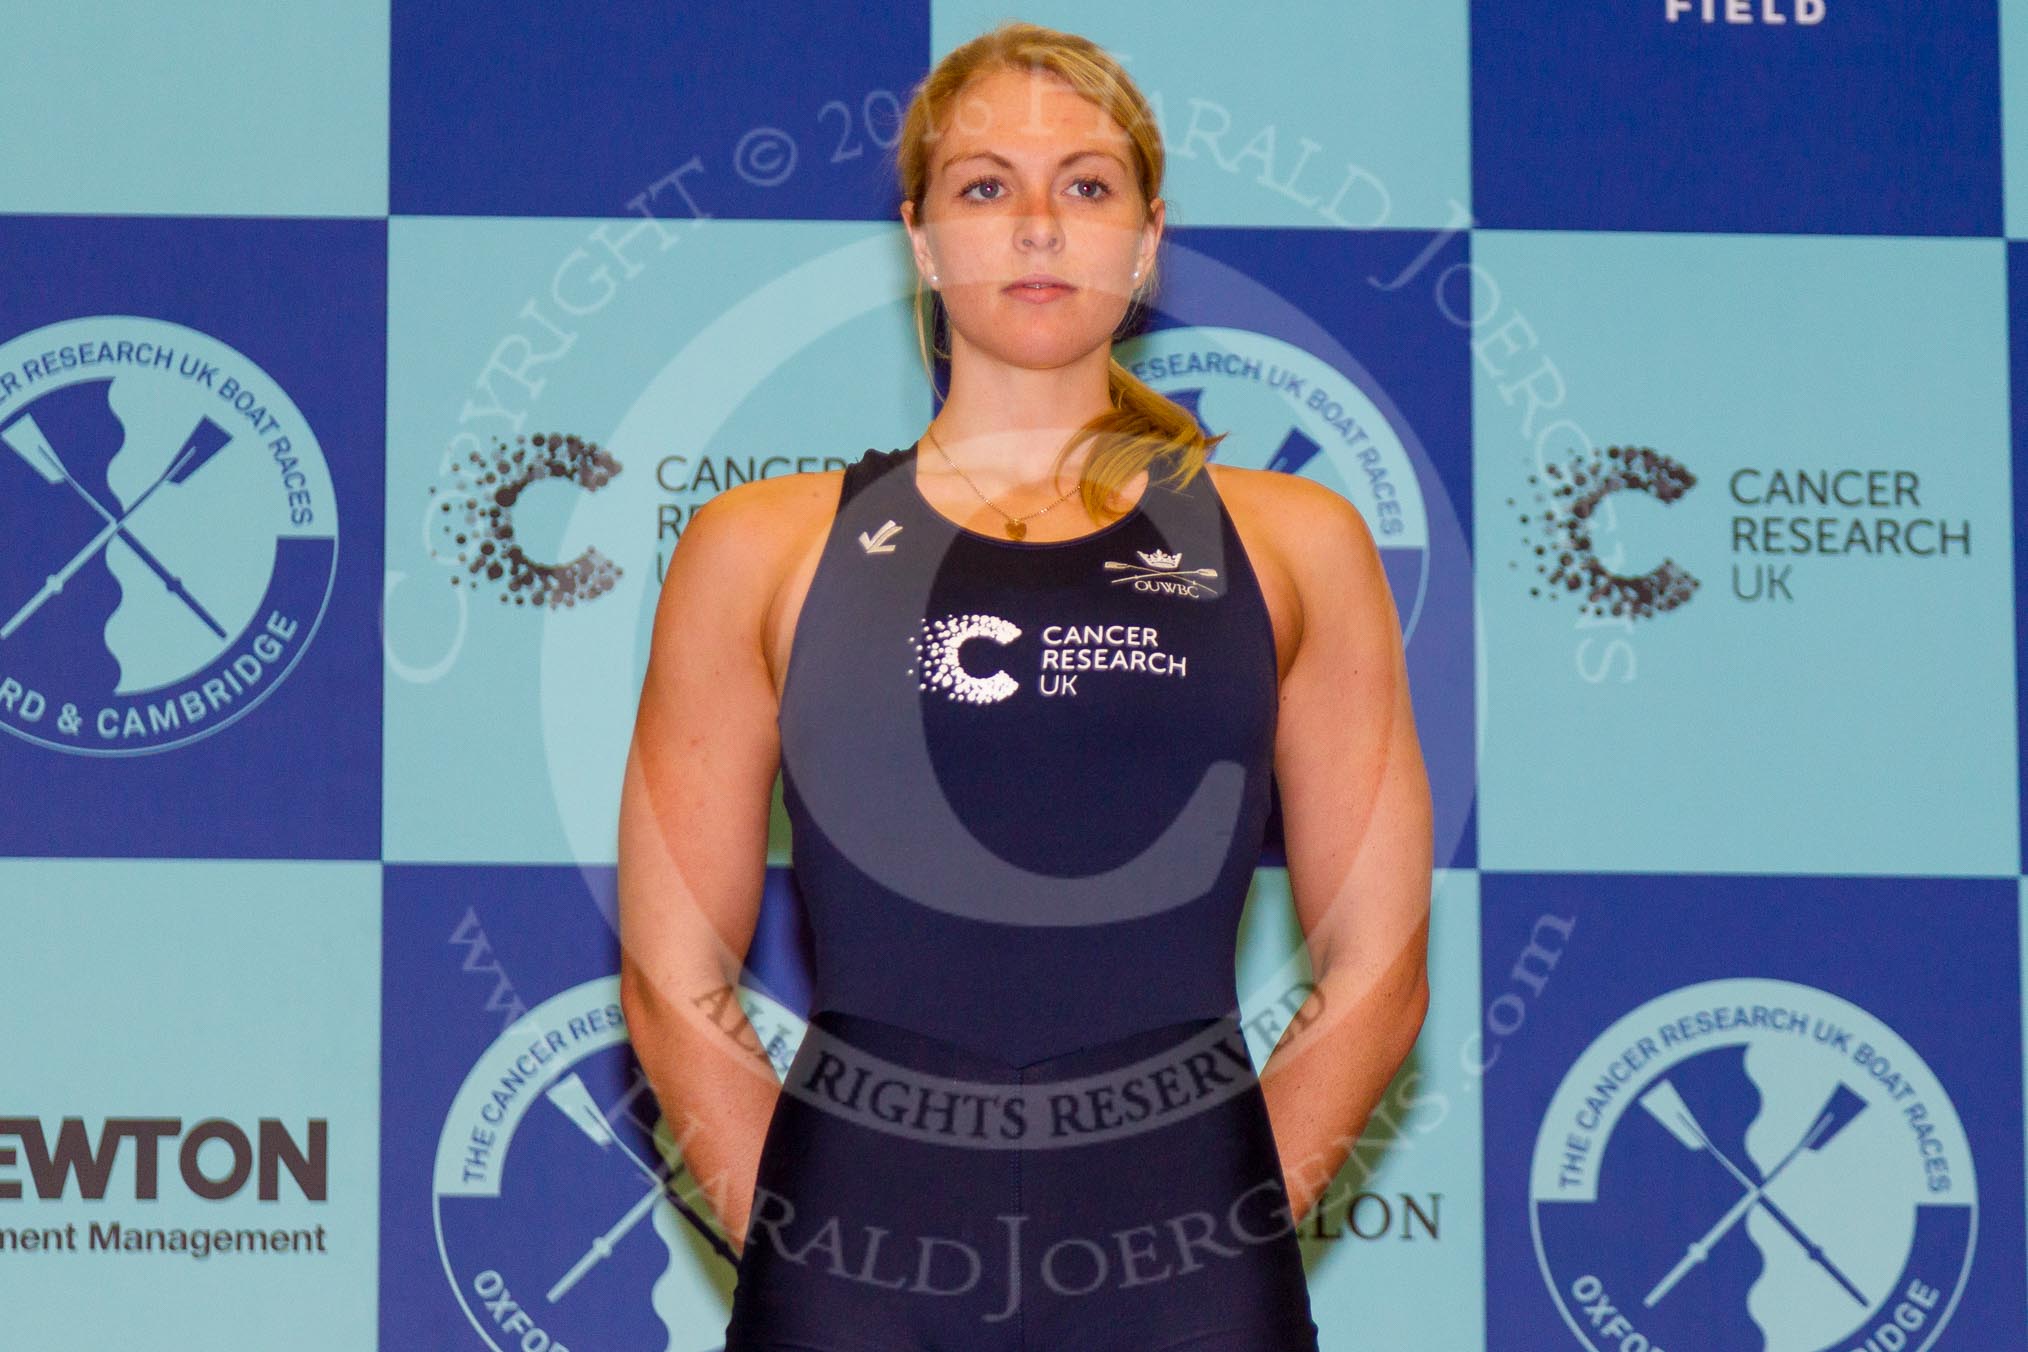 The Boat Race season 2016 - Crew Announcement and Weigh-In: The Women's Boat Race, 2 seat: Oxford: Emma Spruce – 72.0k.
Westmister Hall, Westminster,
London SW11,

United Kingdom,
on 01 March 2016 at 10:09, image #22